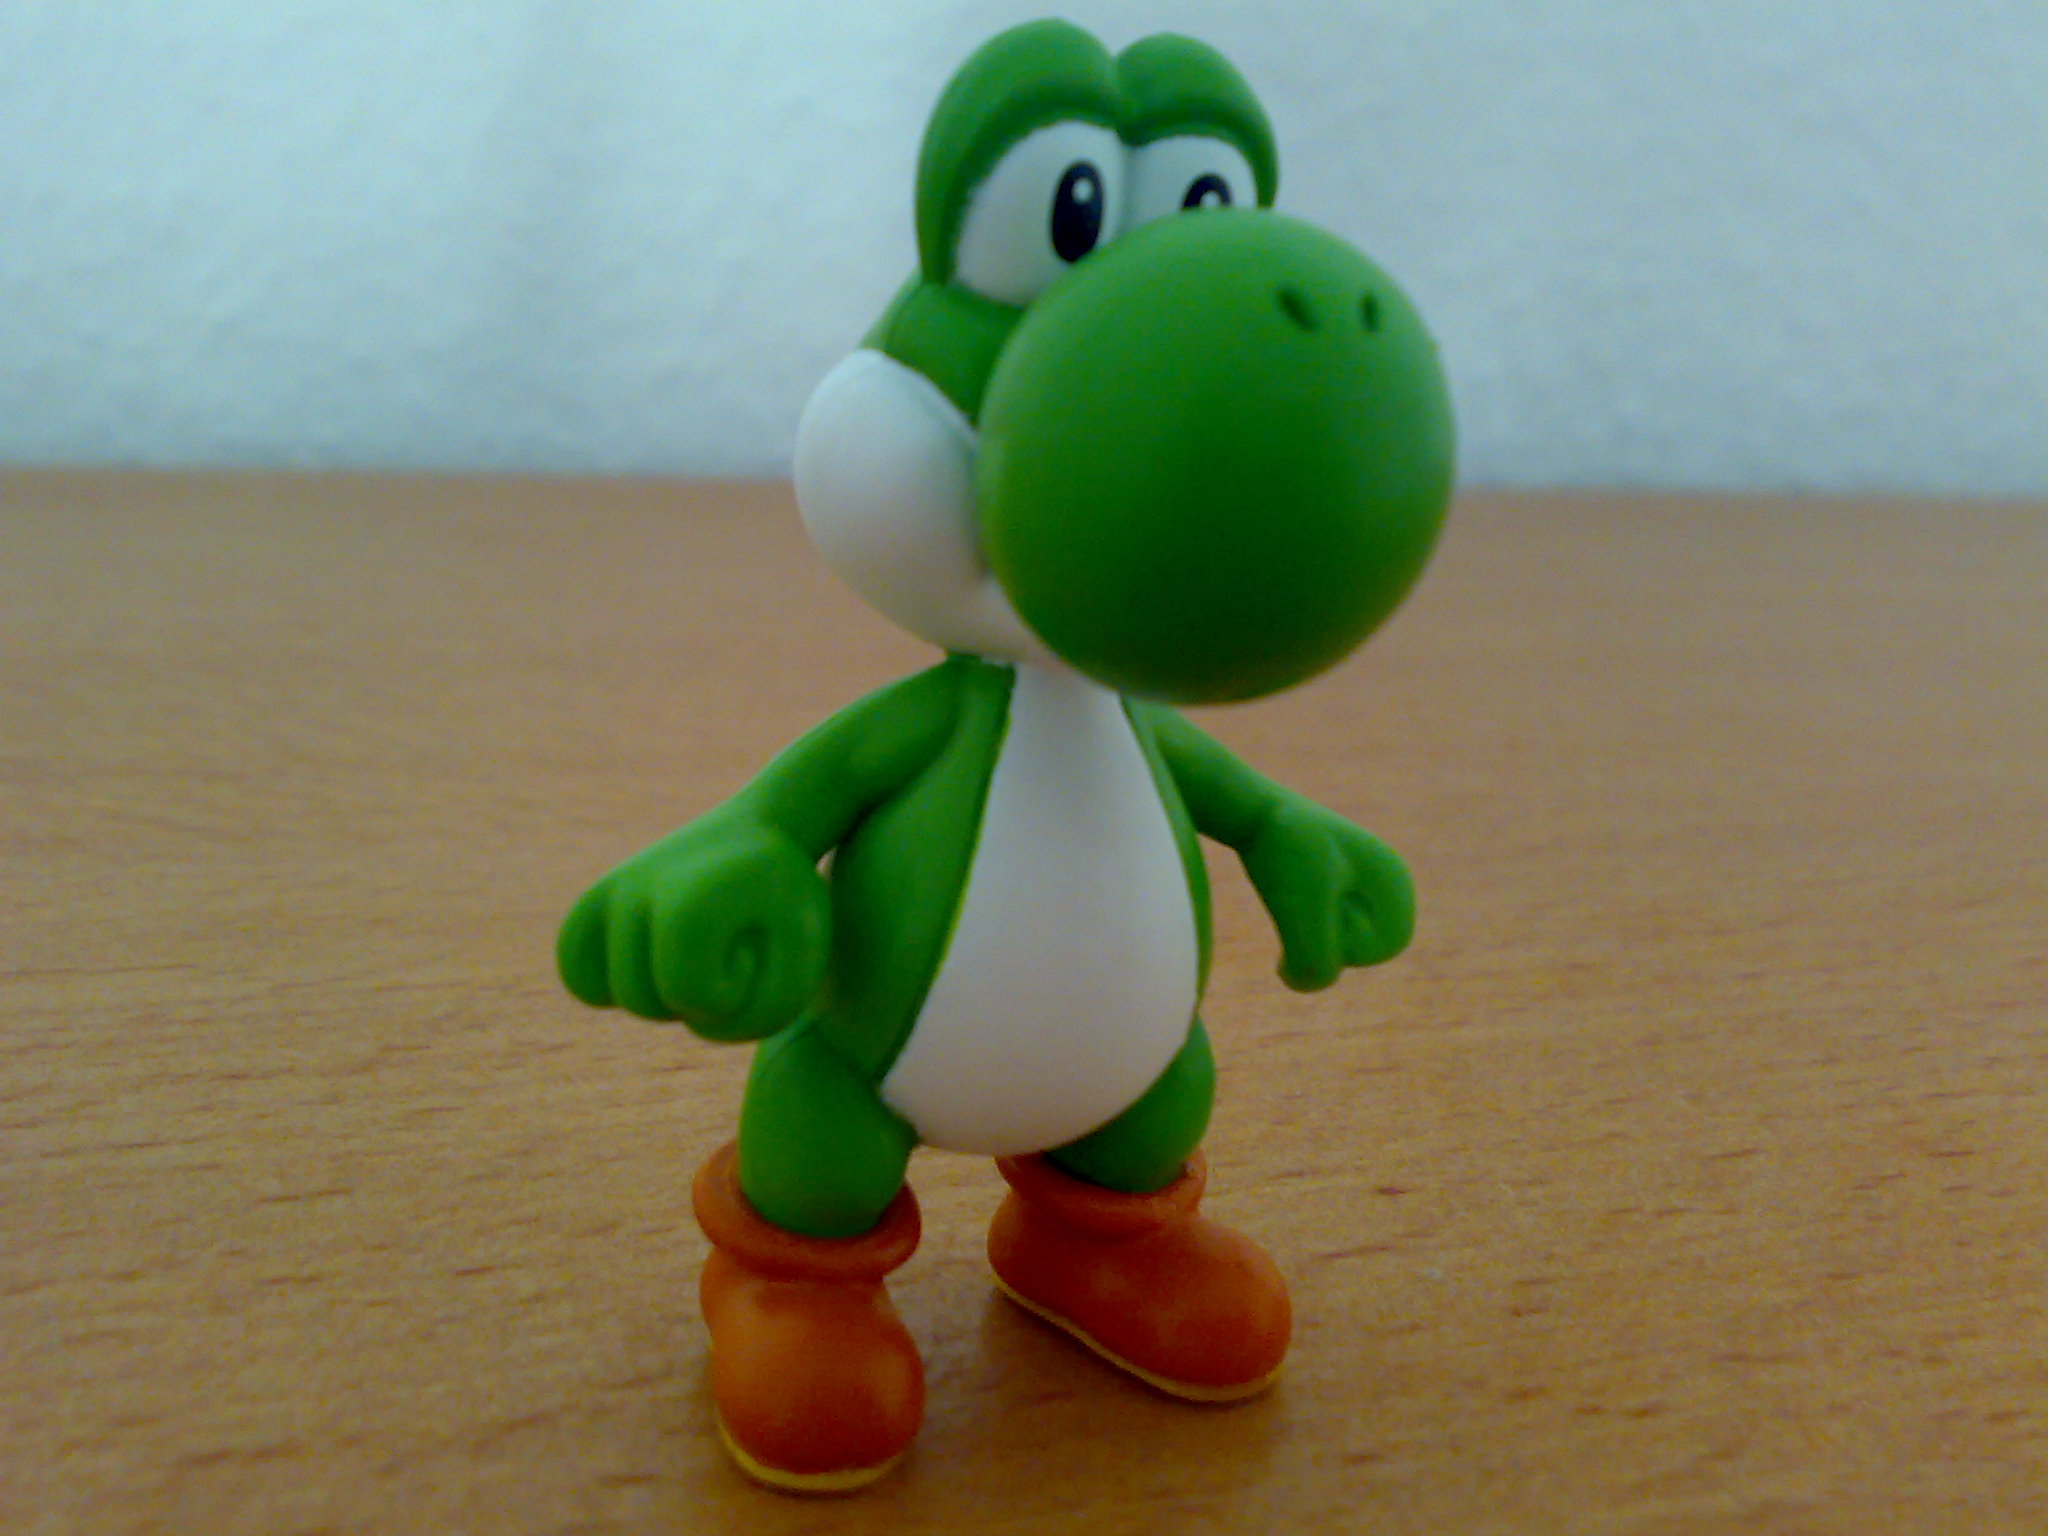 a green and white toy that has a smile on its face